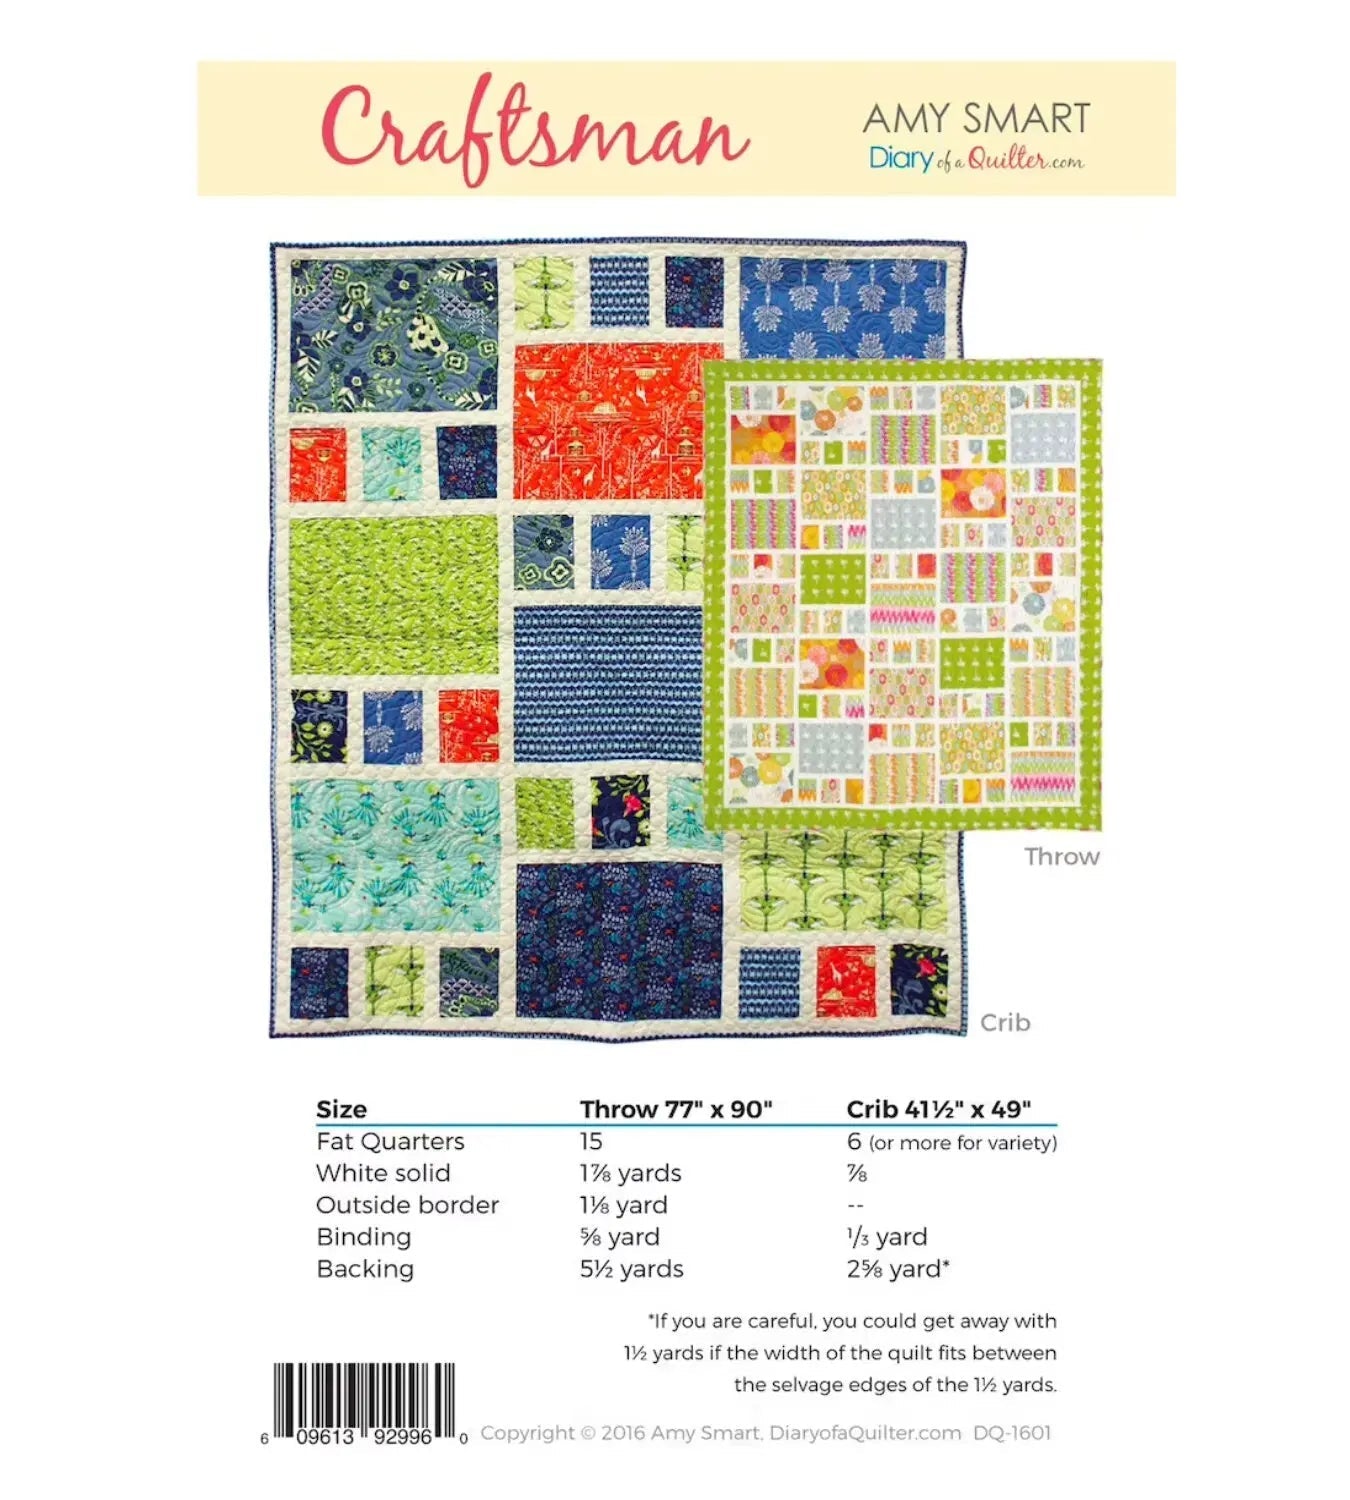 Craftsman Quilt Pattern  by Amy Smart and Diary of a Quilter - Jammin Threads